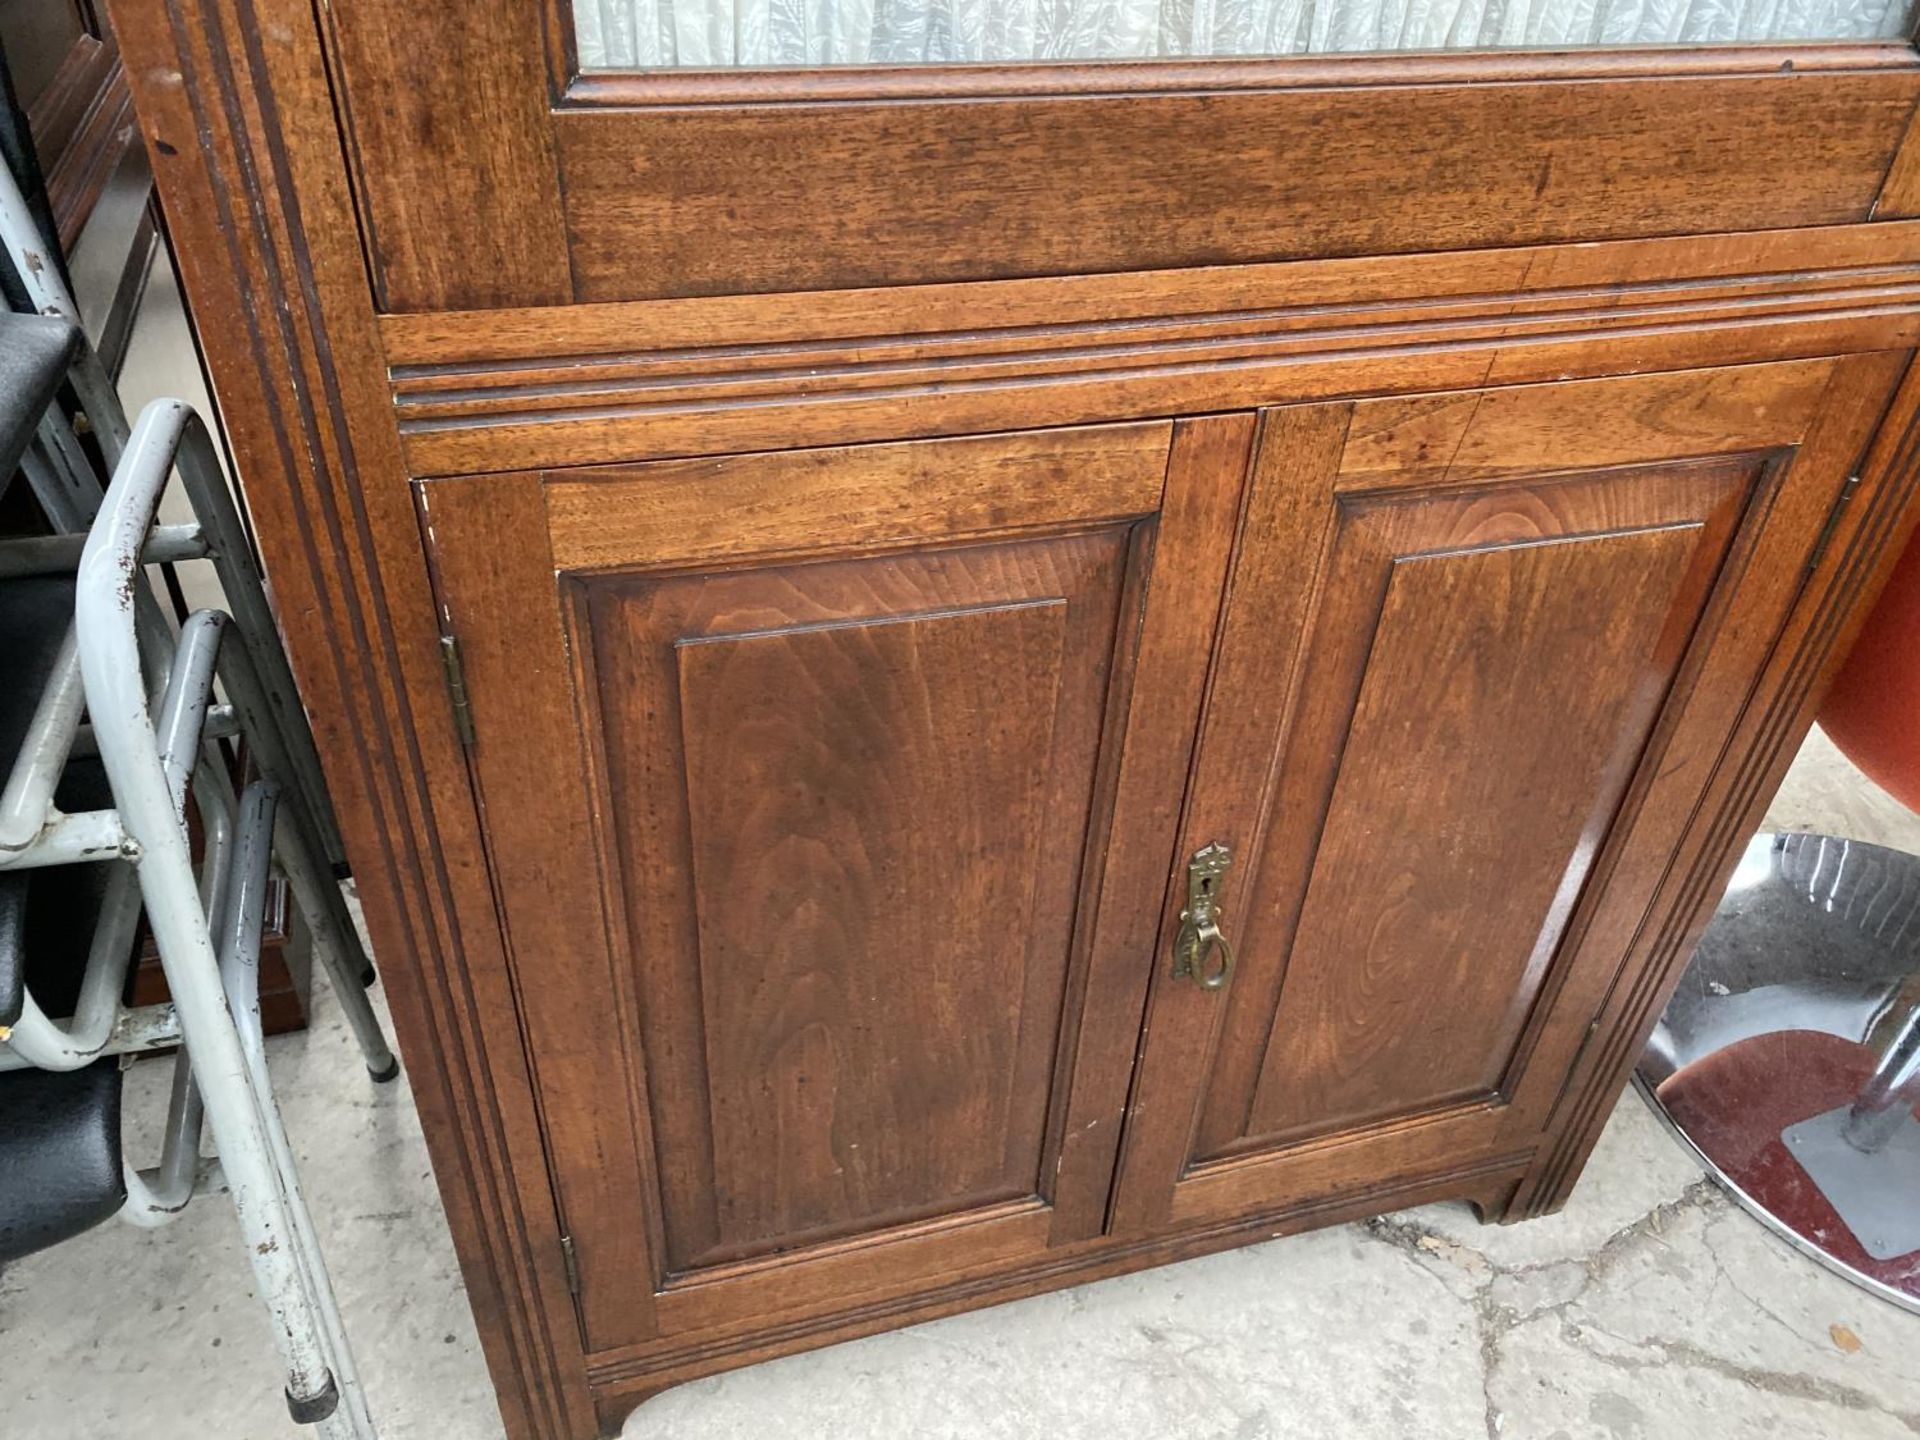 A TALL MAHOGANY CABINET WITH TWO LOWER DOORS AND UPPER GLAZED PANEL DOOR - Image 3 of 4